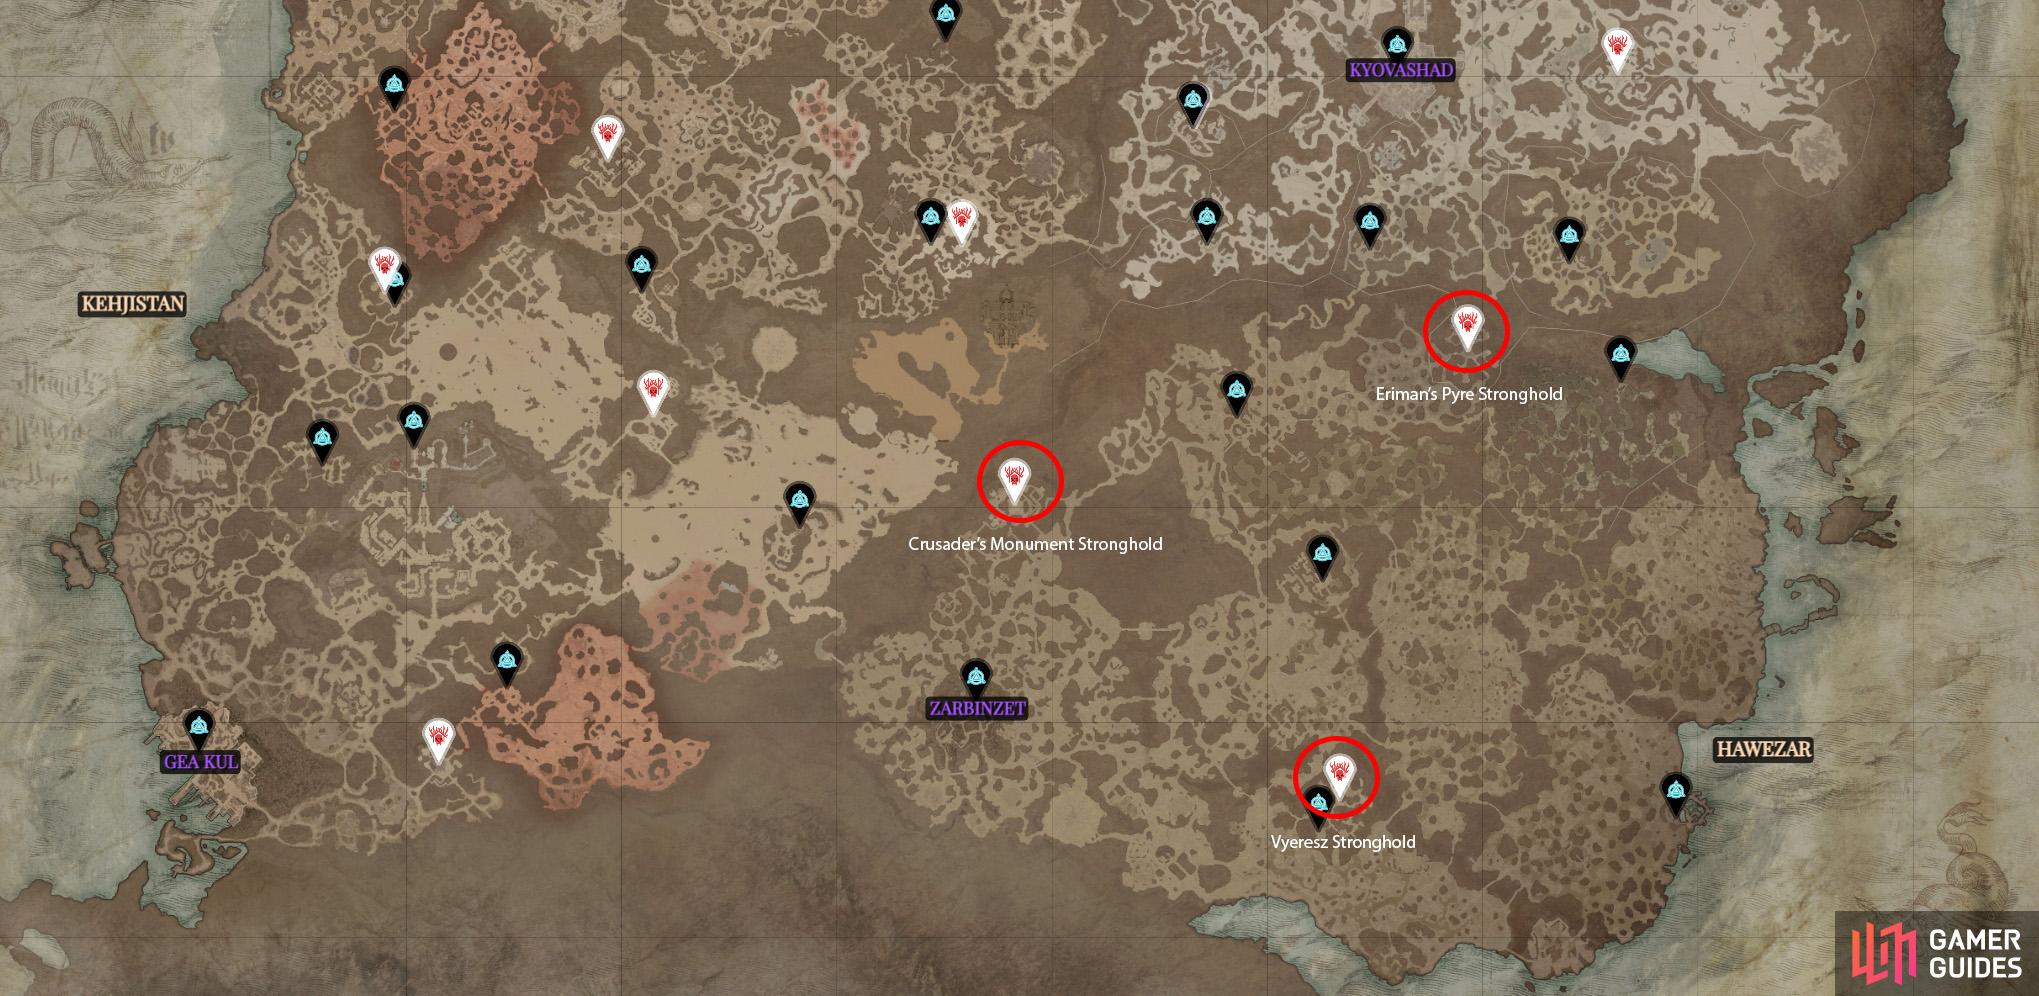 You can find the strongholds in these three locations.